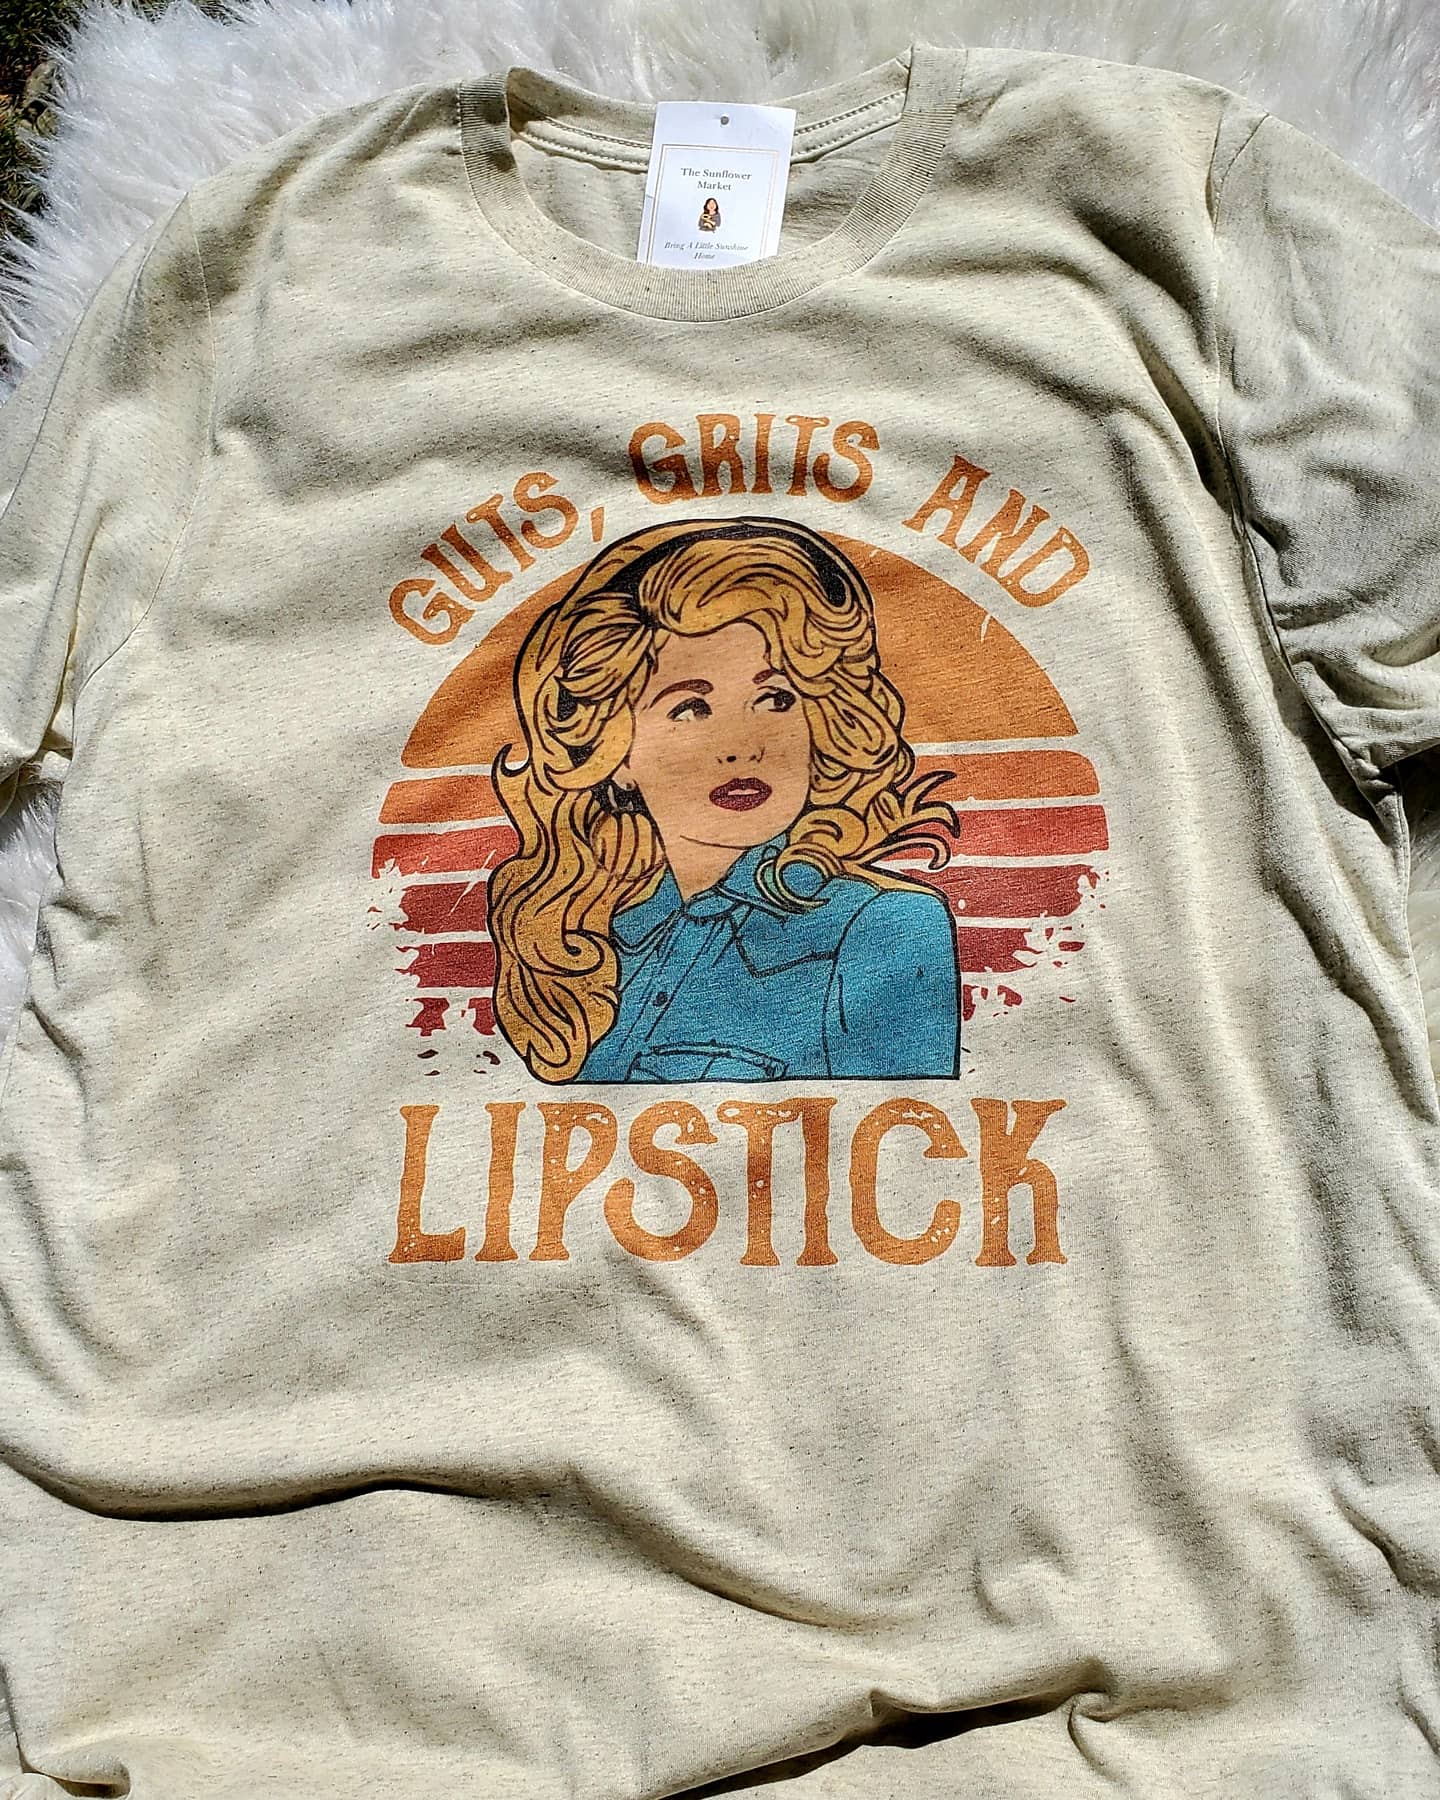 Dolly Parton, Guts, Grit and Lipstick Tee